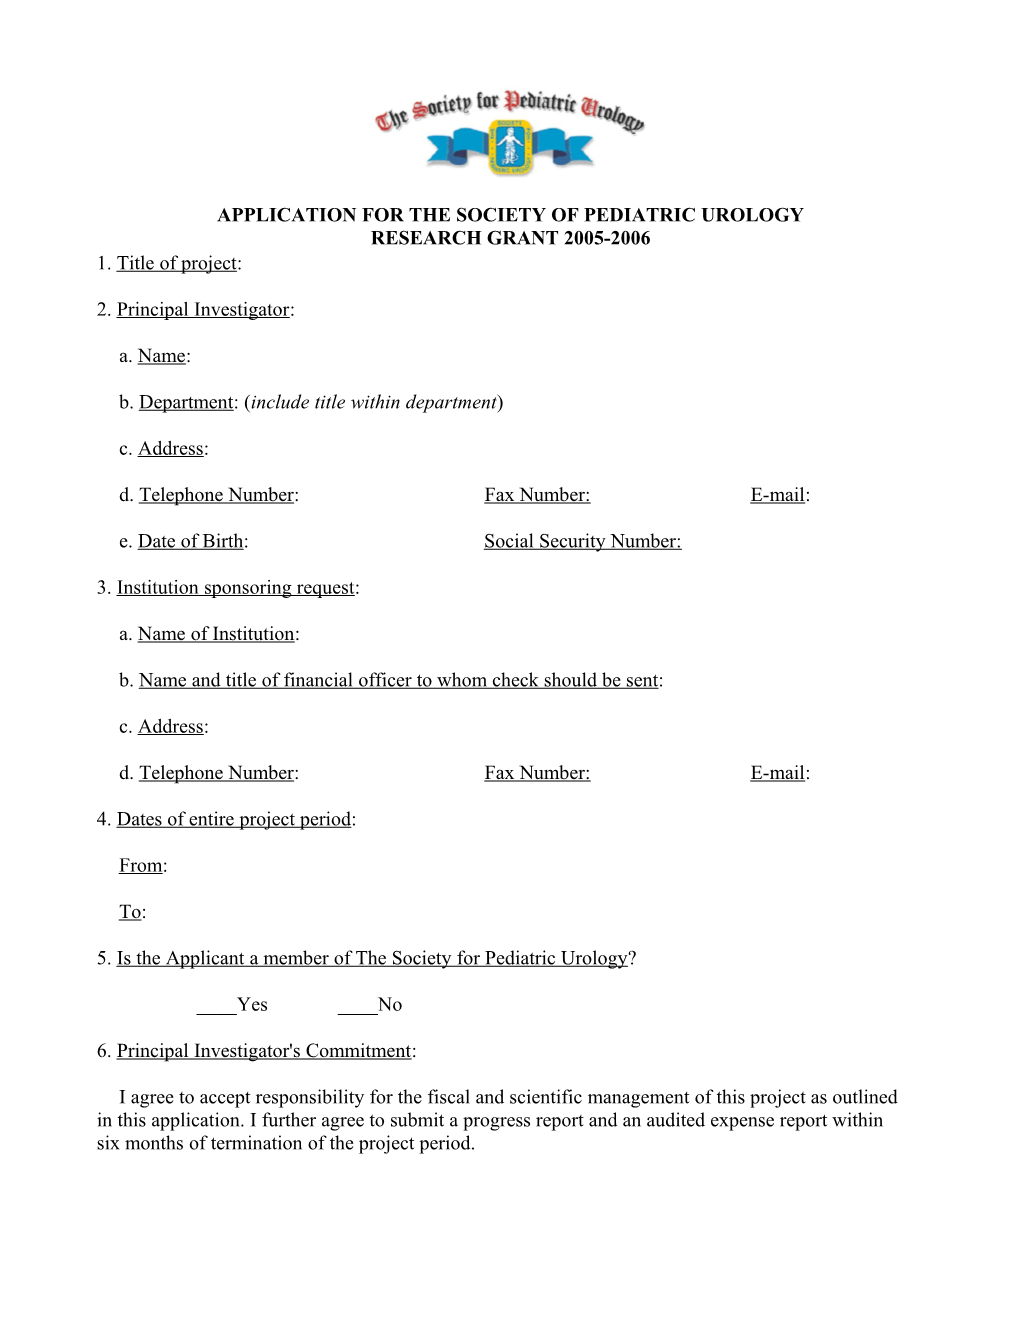 Application for the Society of Pediatric Urology